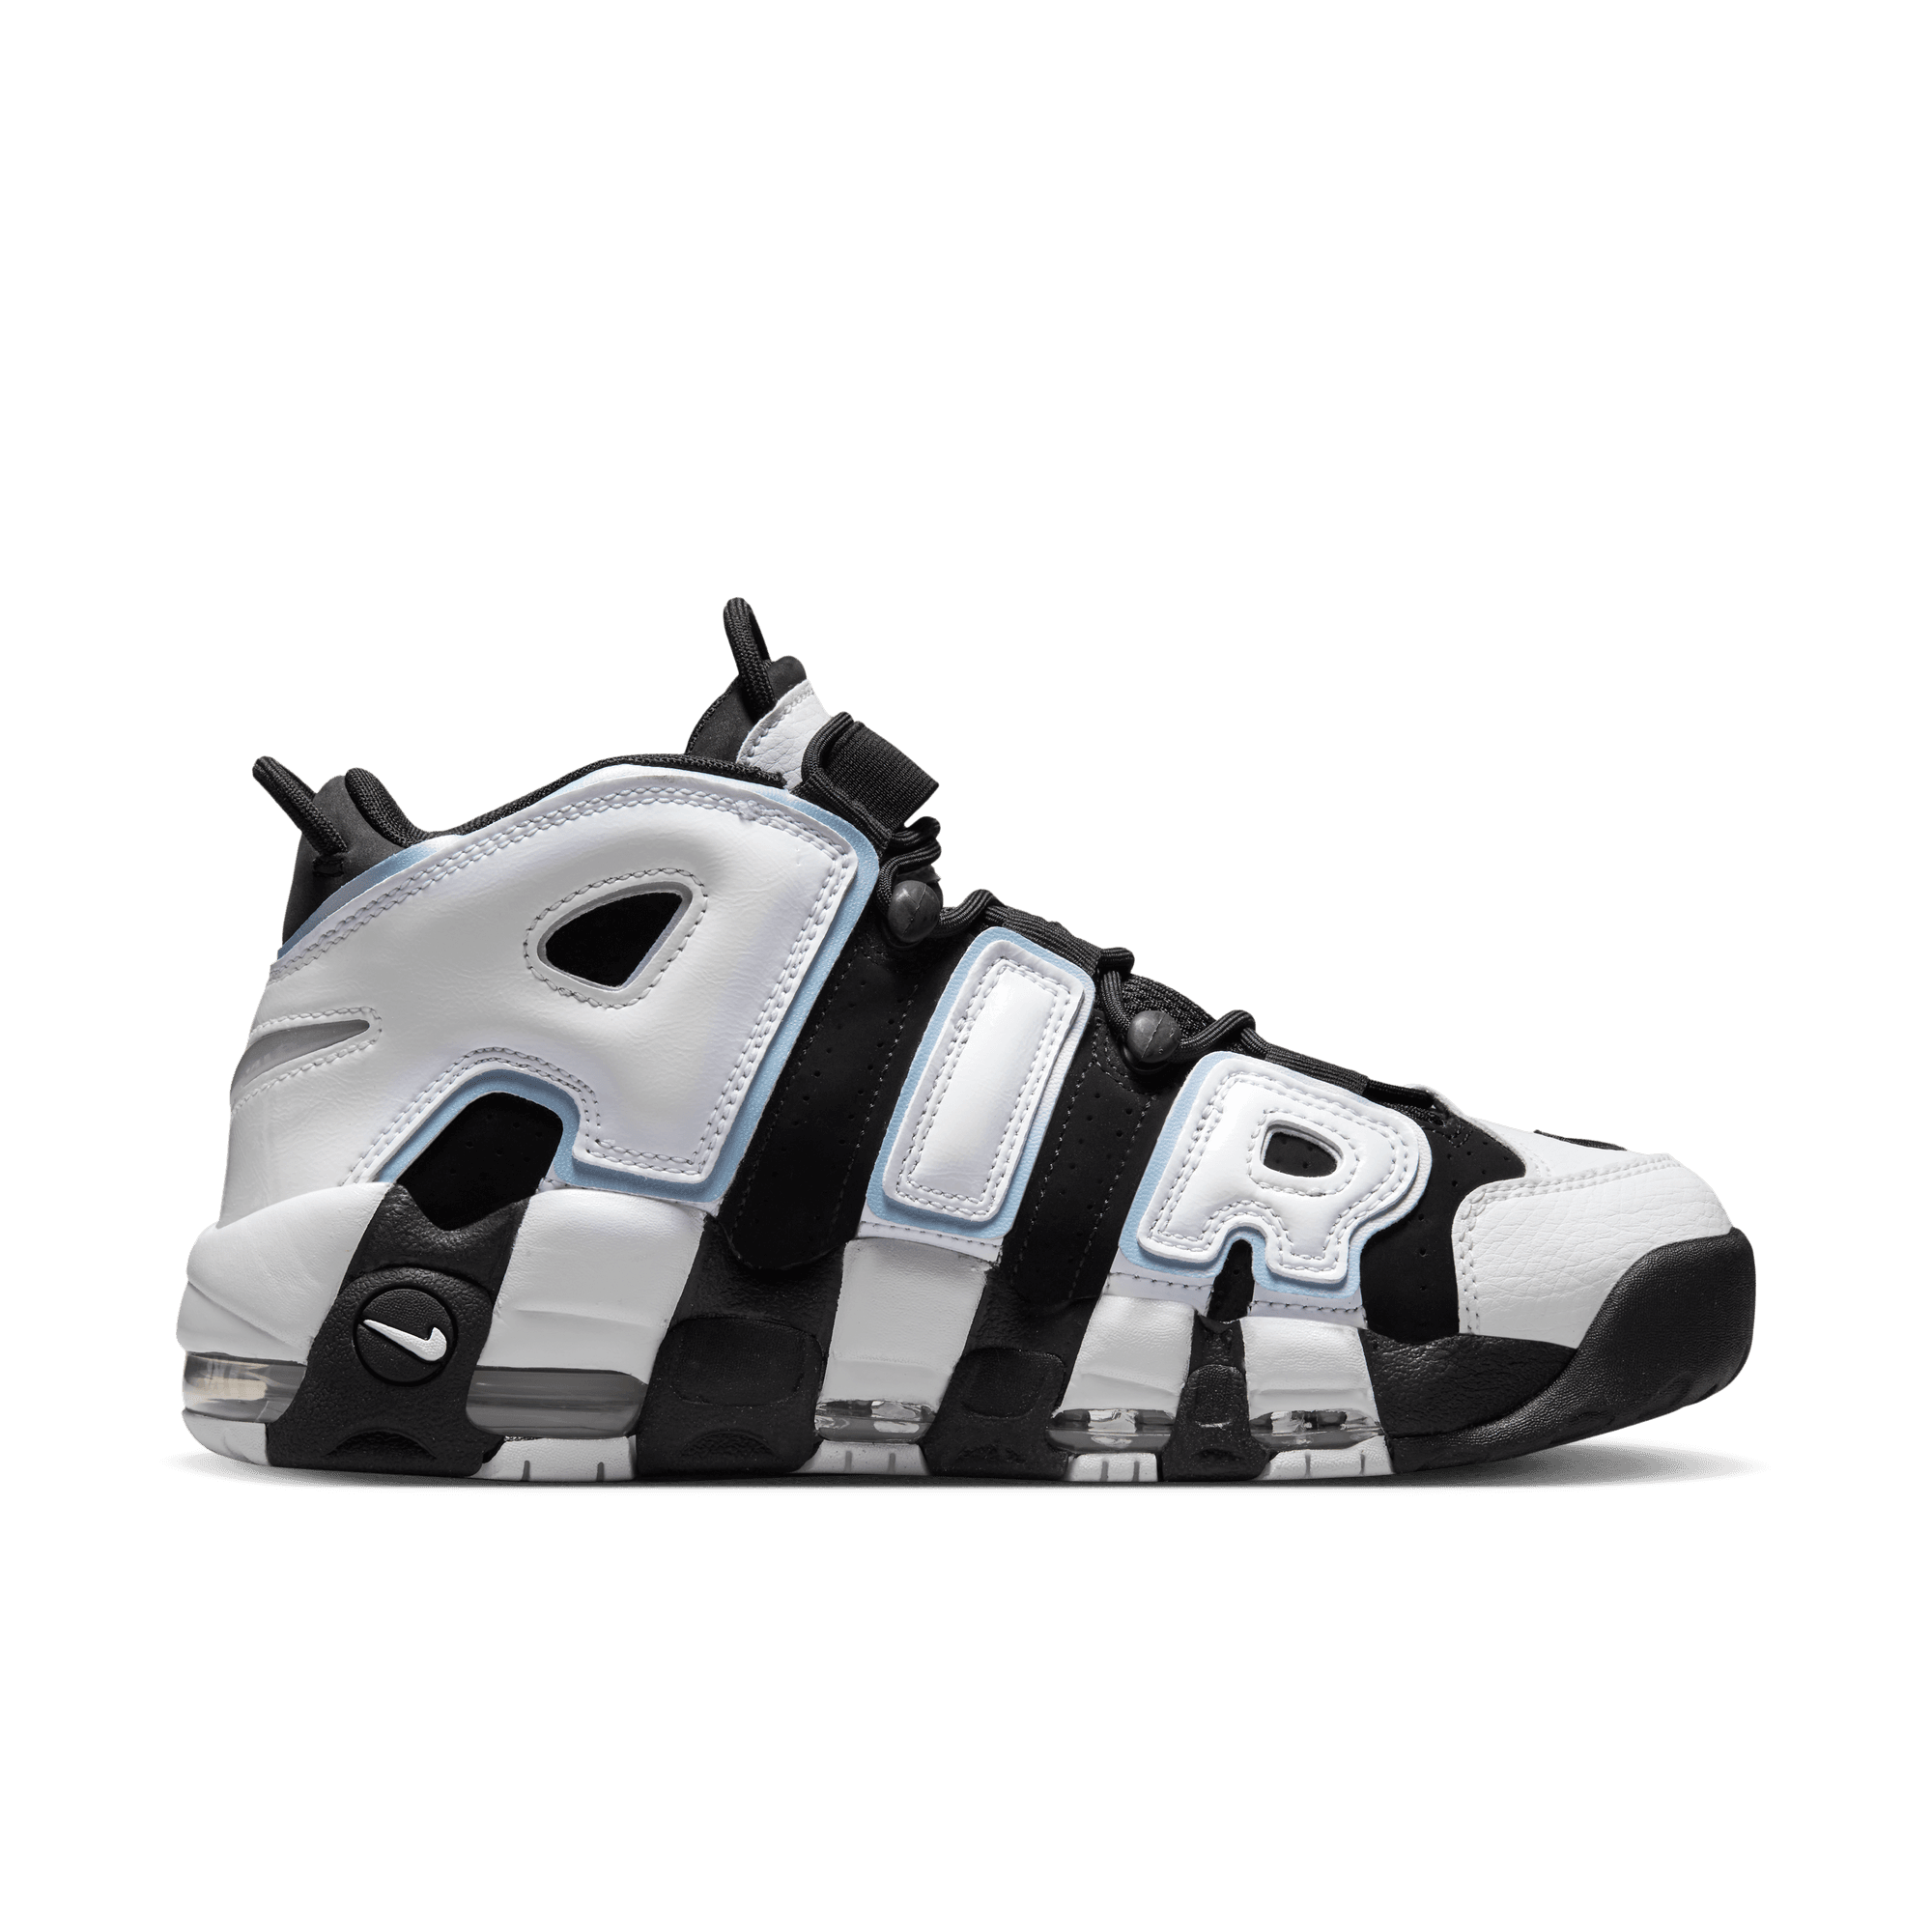 The Supreme Nike Uptempos Are Bold Branding At Its Finest